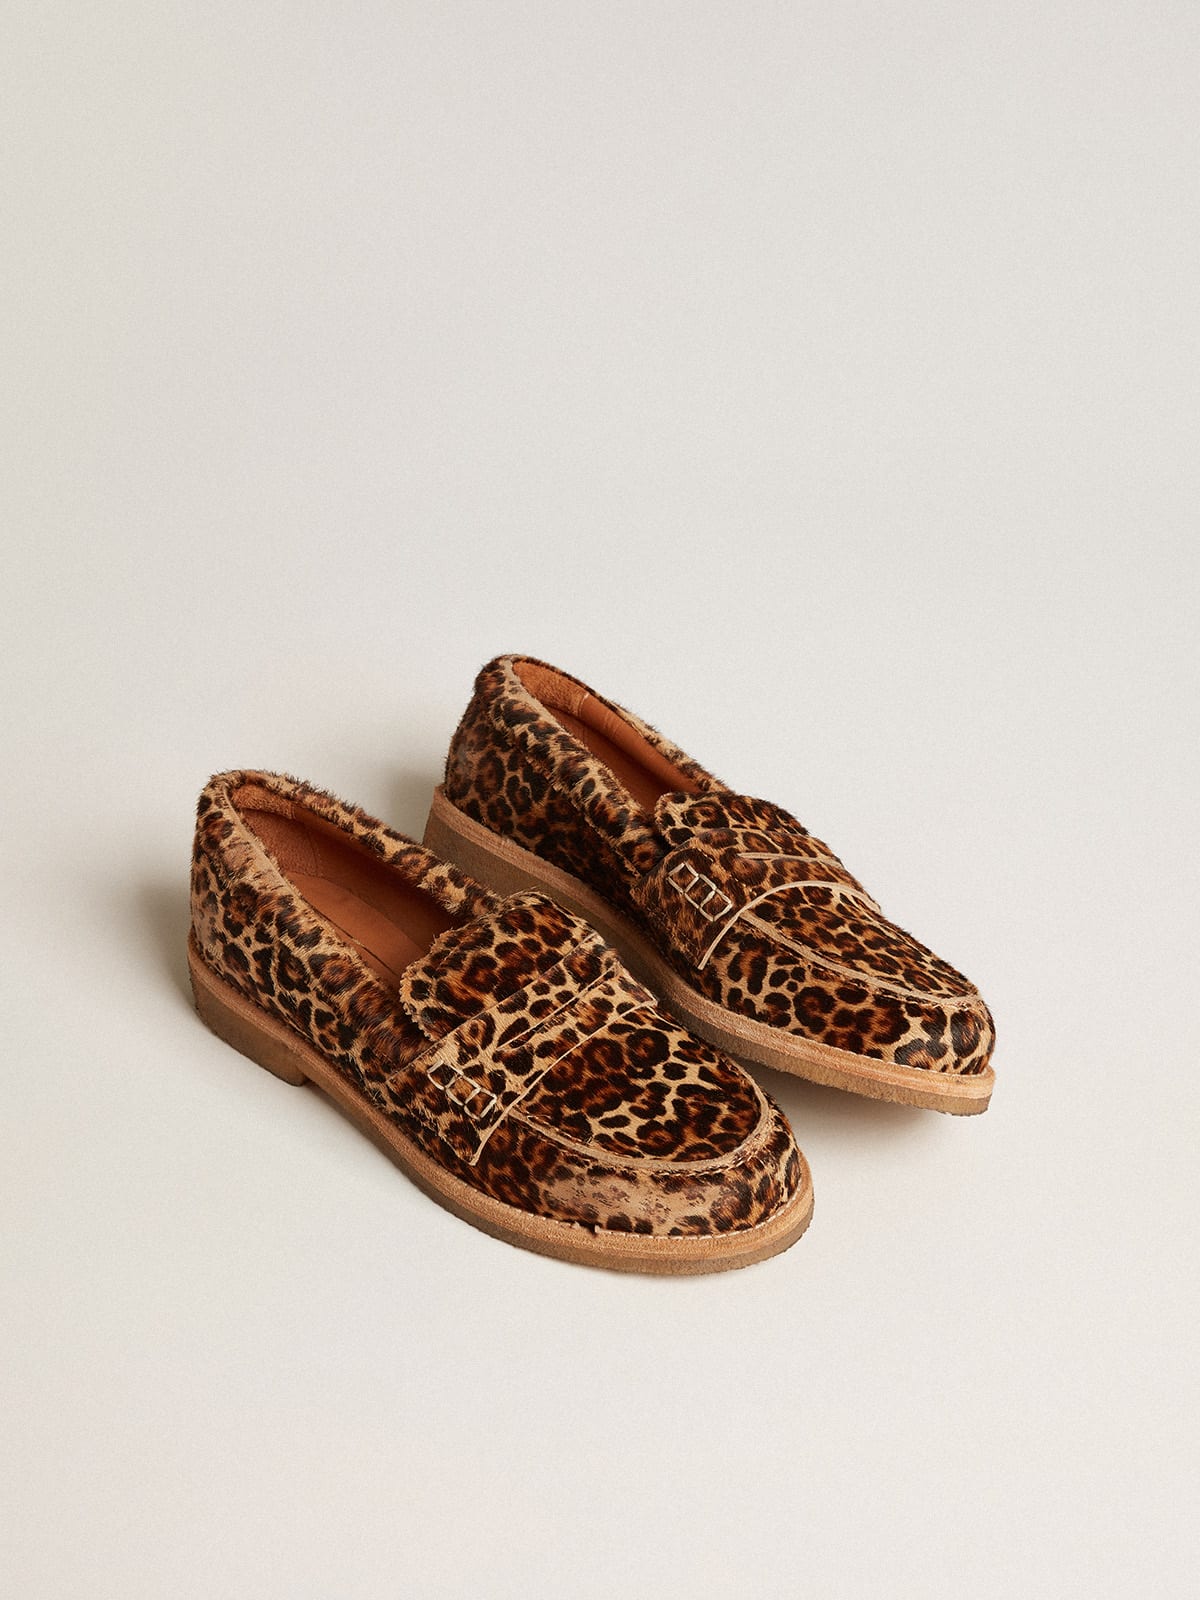 Lucky Brand Cahill Animal Print Leopard Loafers Women’s Size 6.5